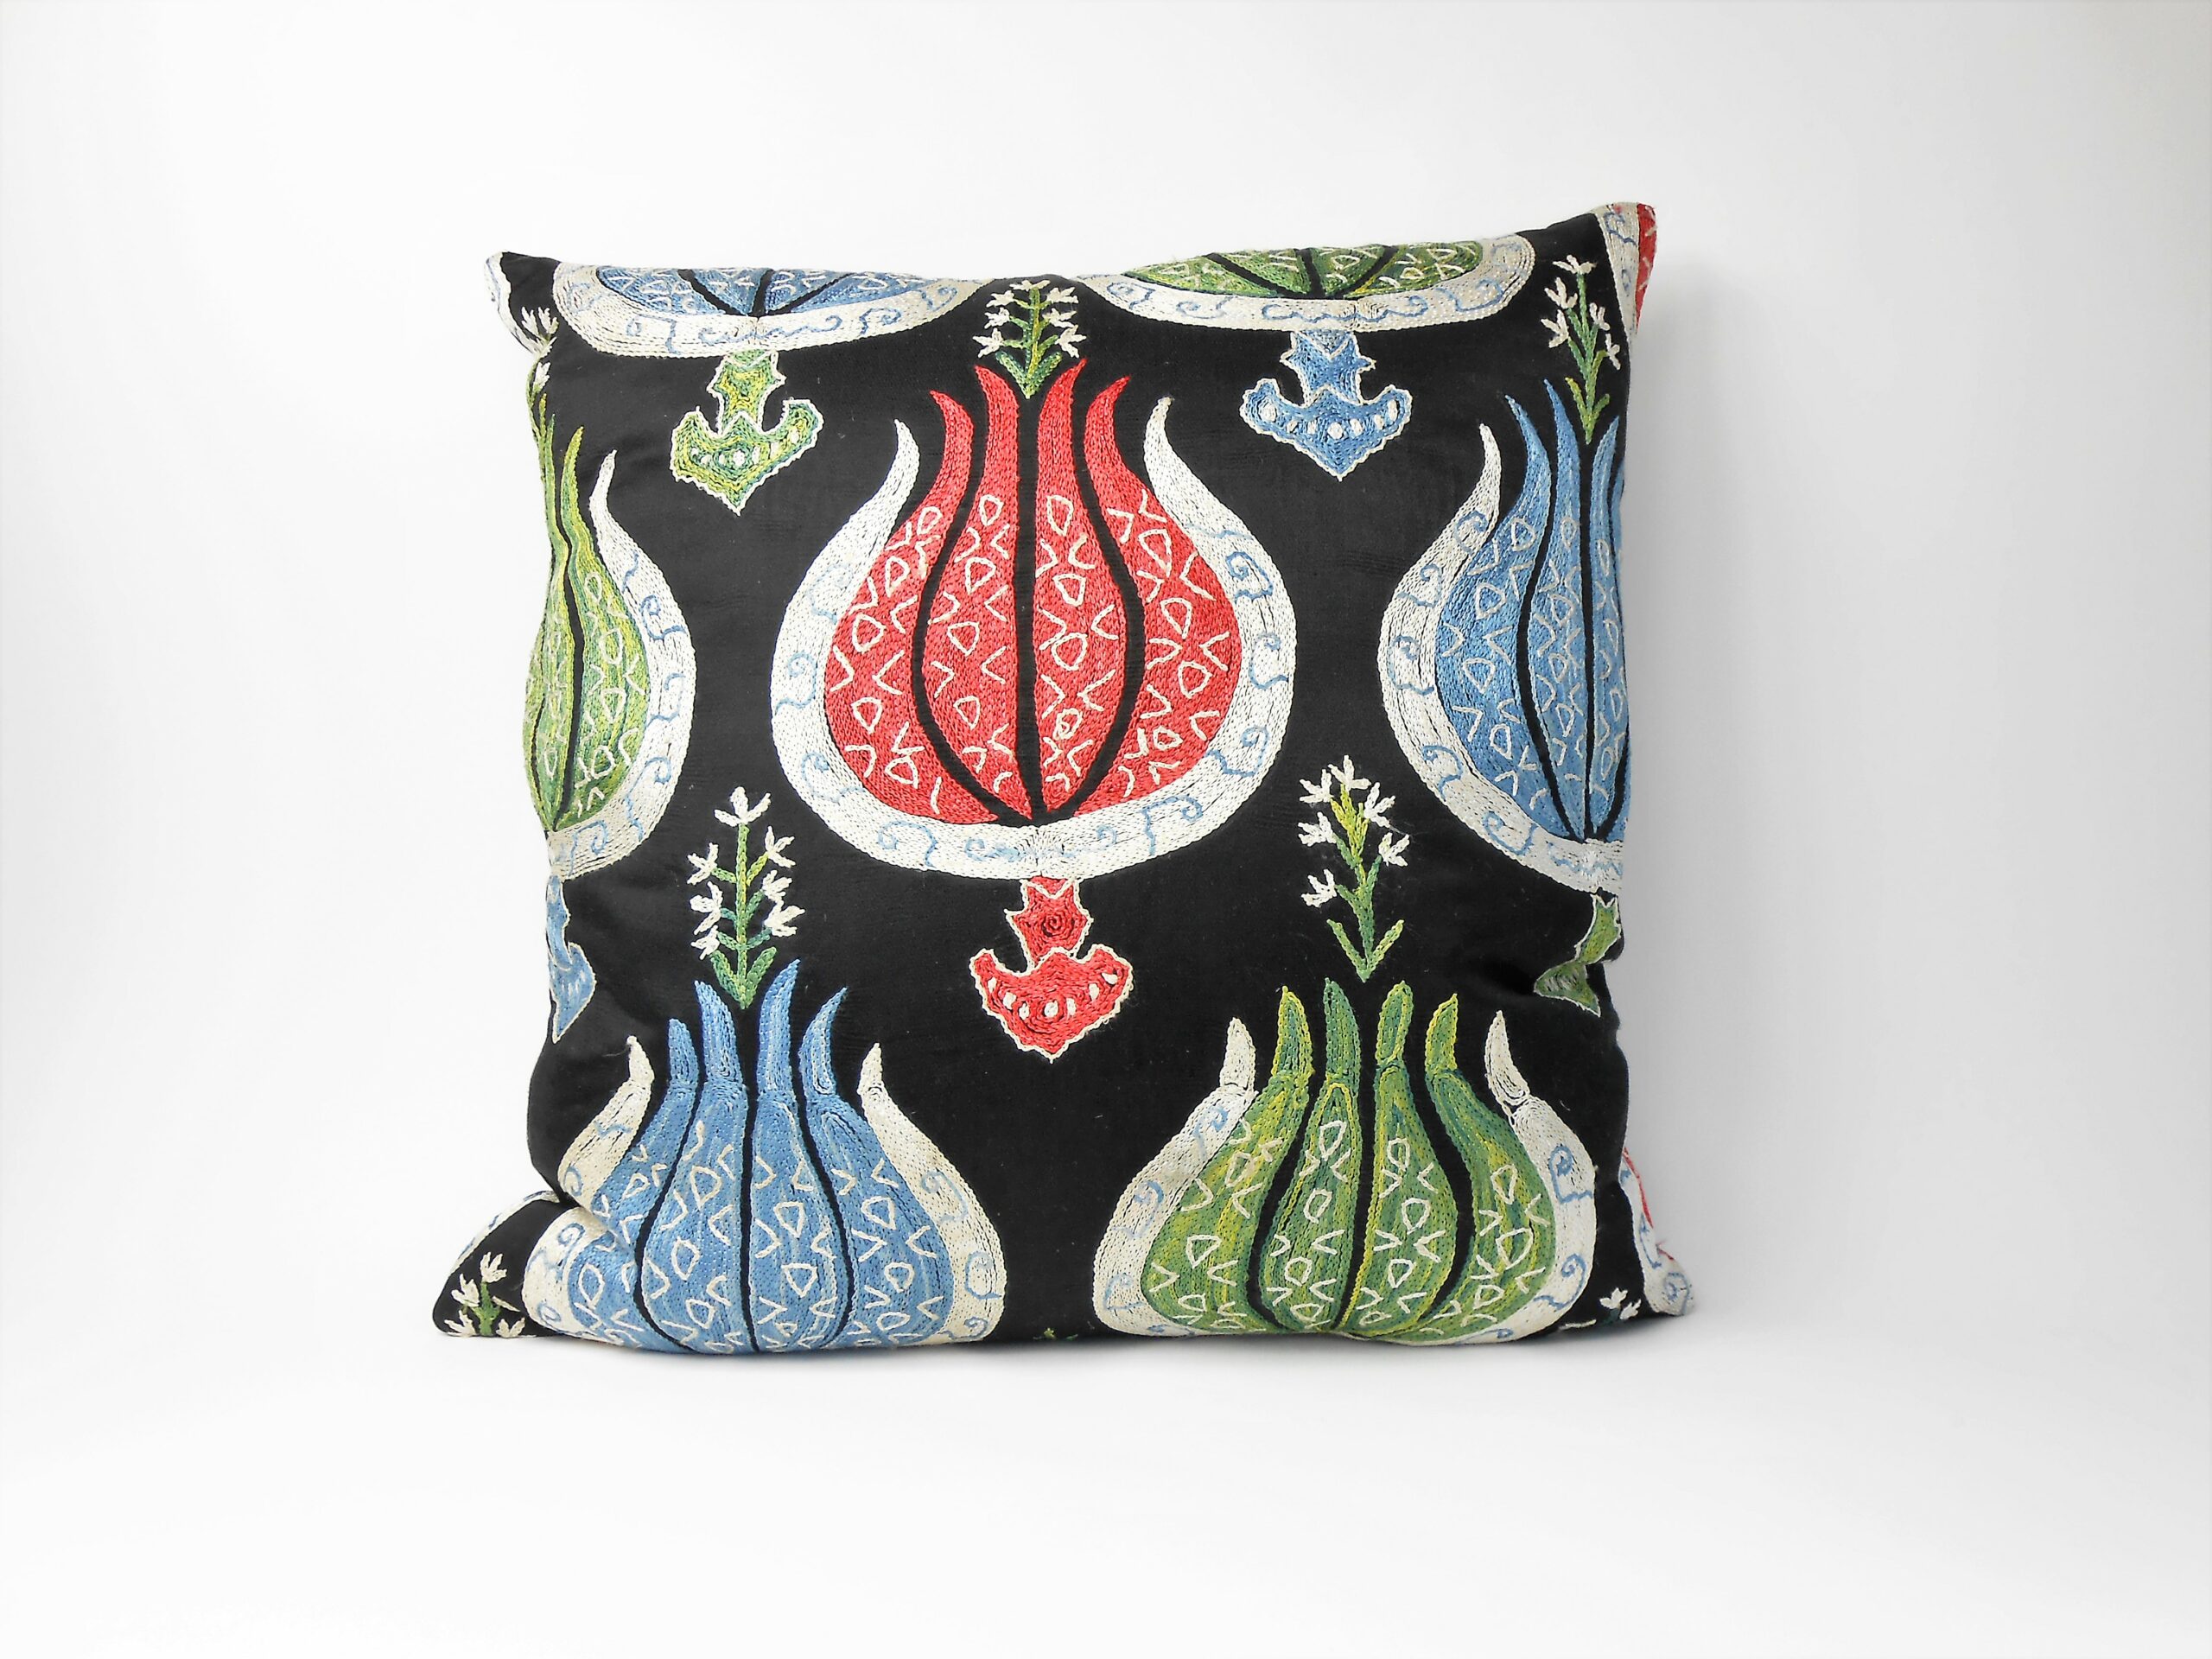 Hand embroidered silk suzani pillow